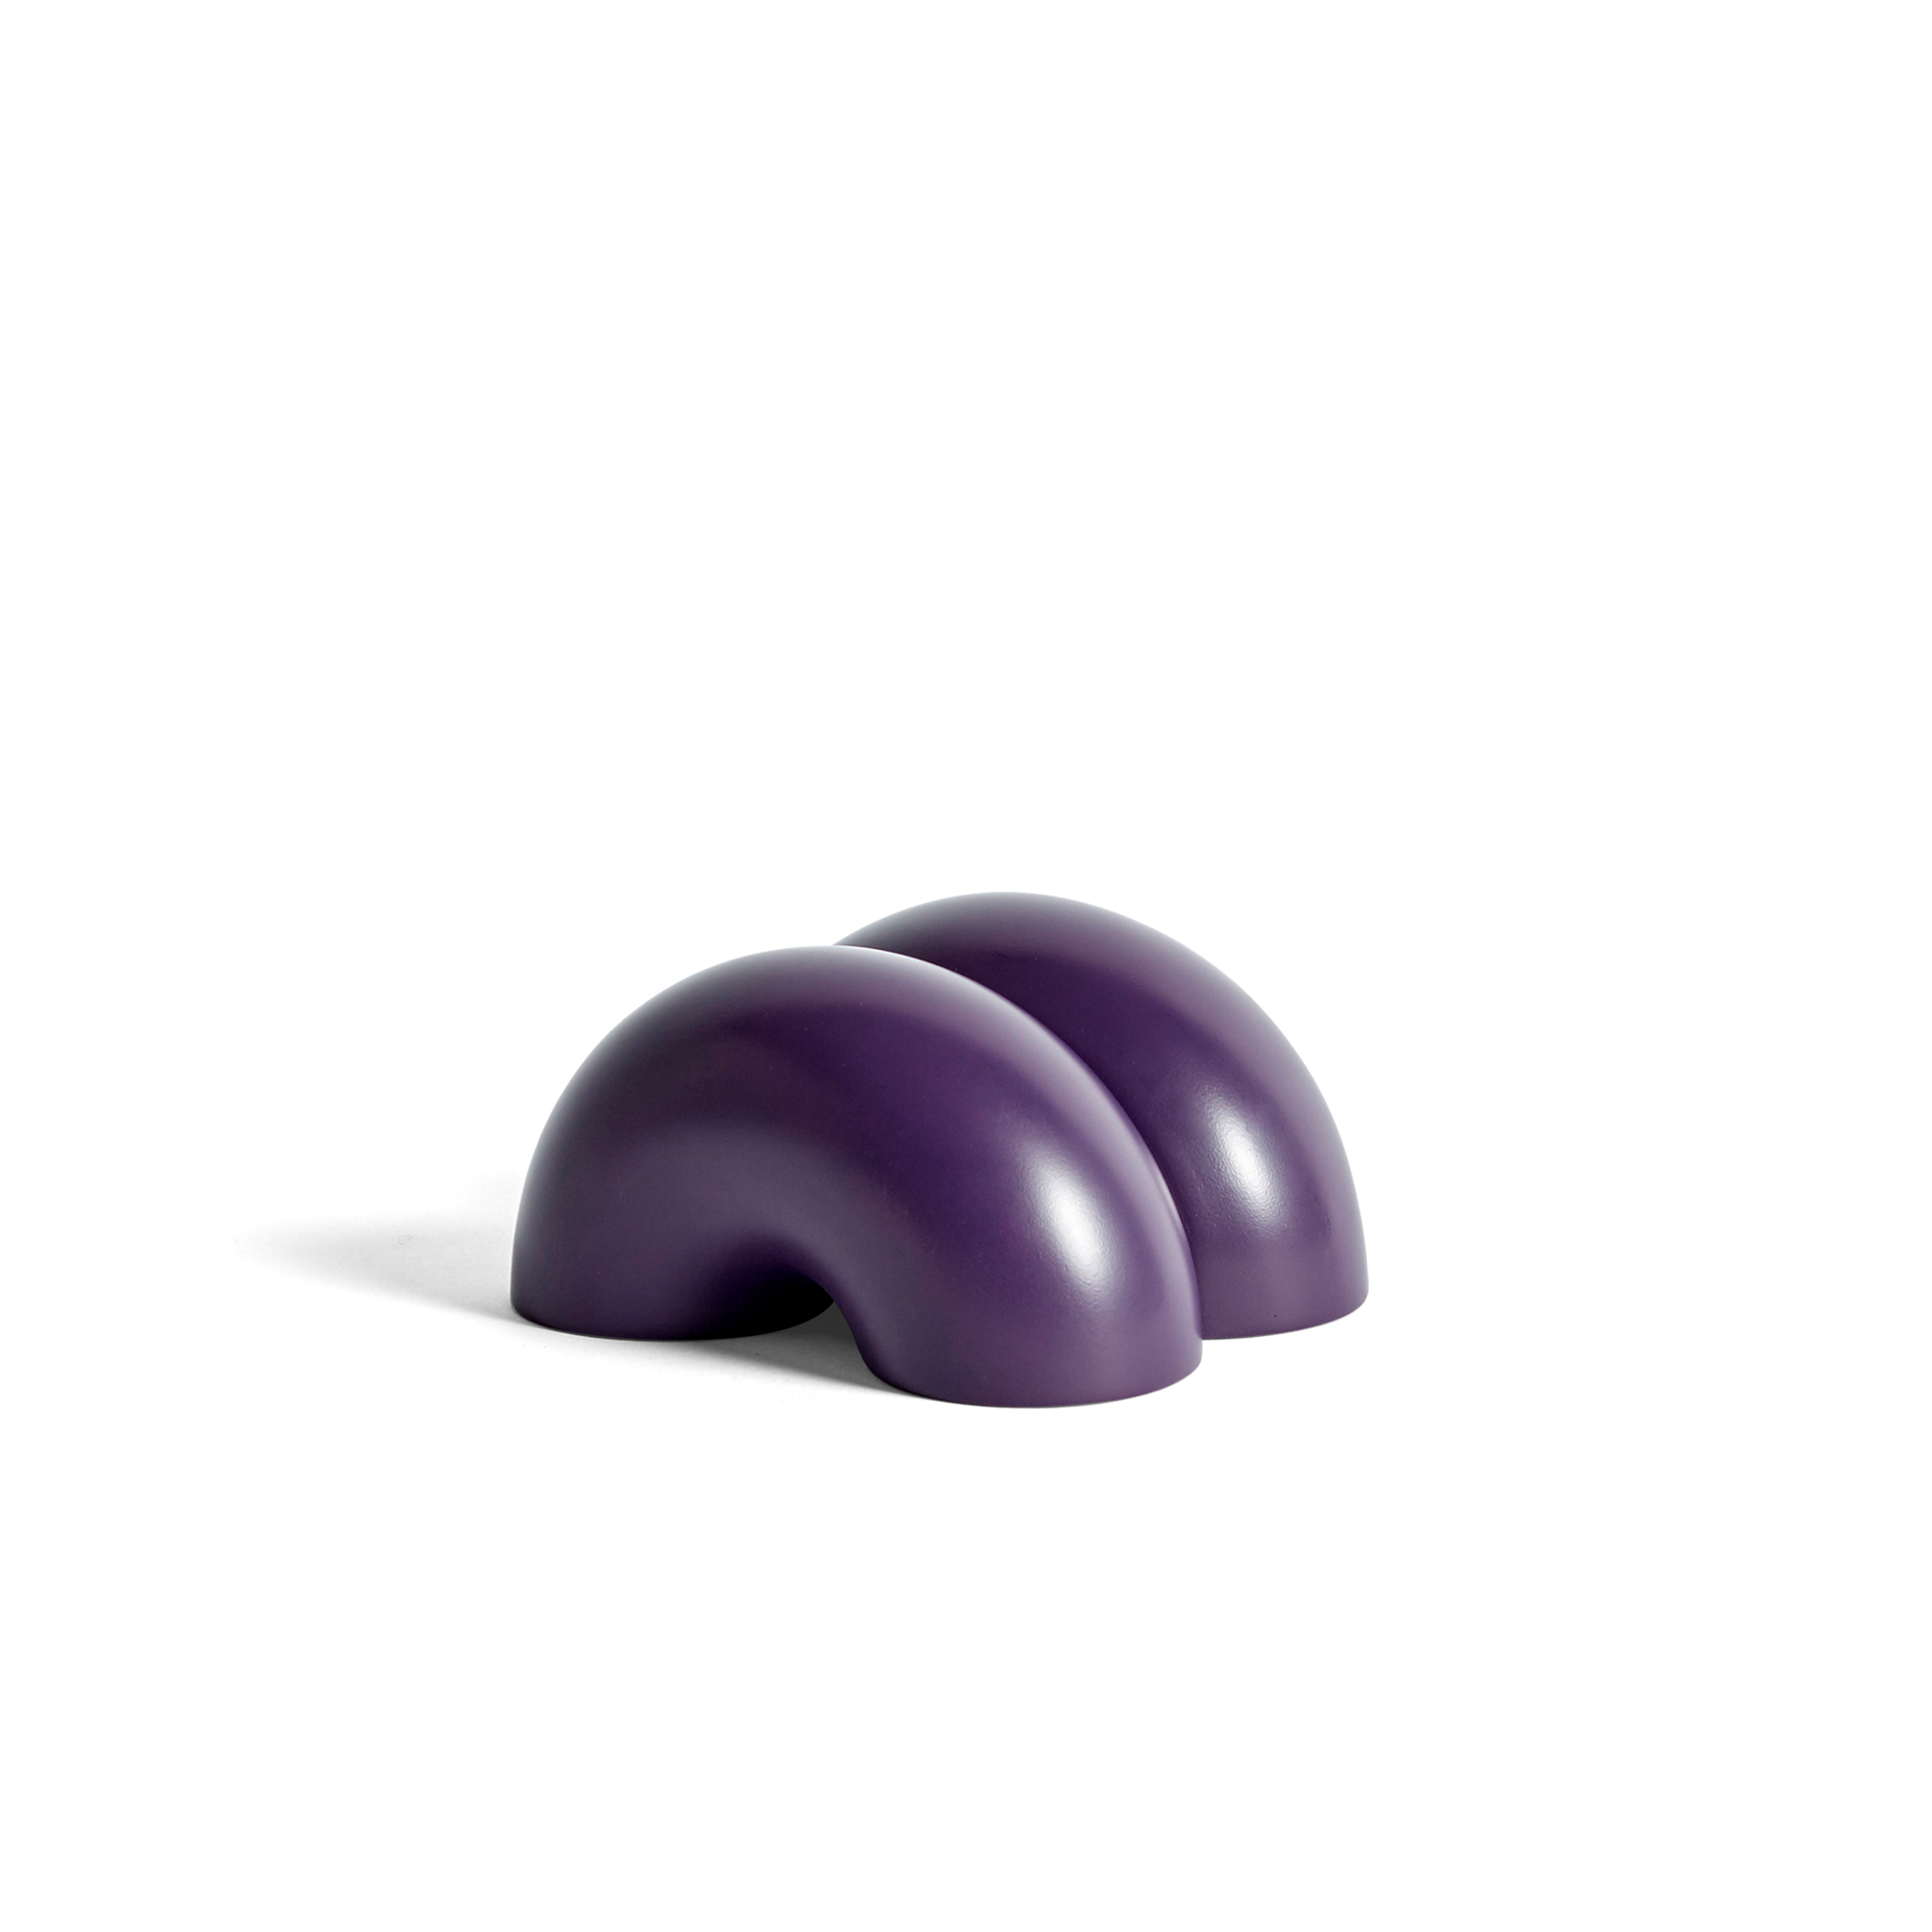 W&S Double Donut Doorstop by Wang & Söderström for Hay